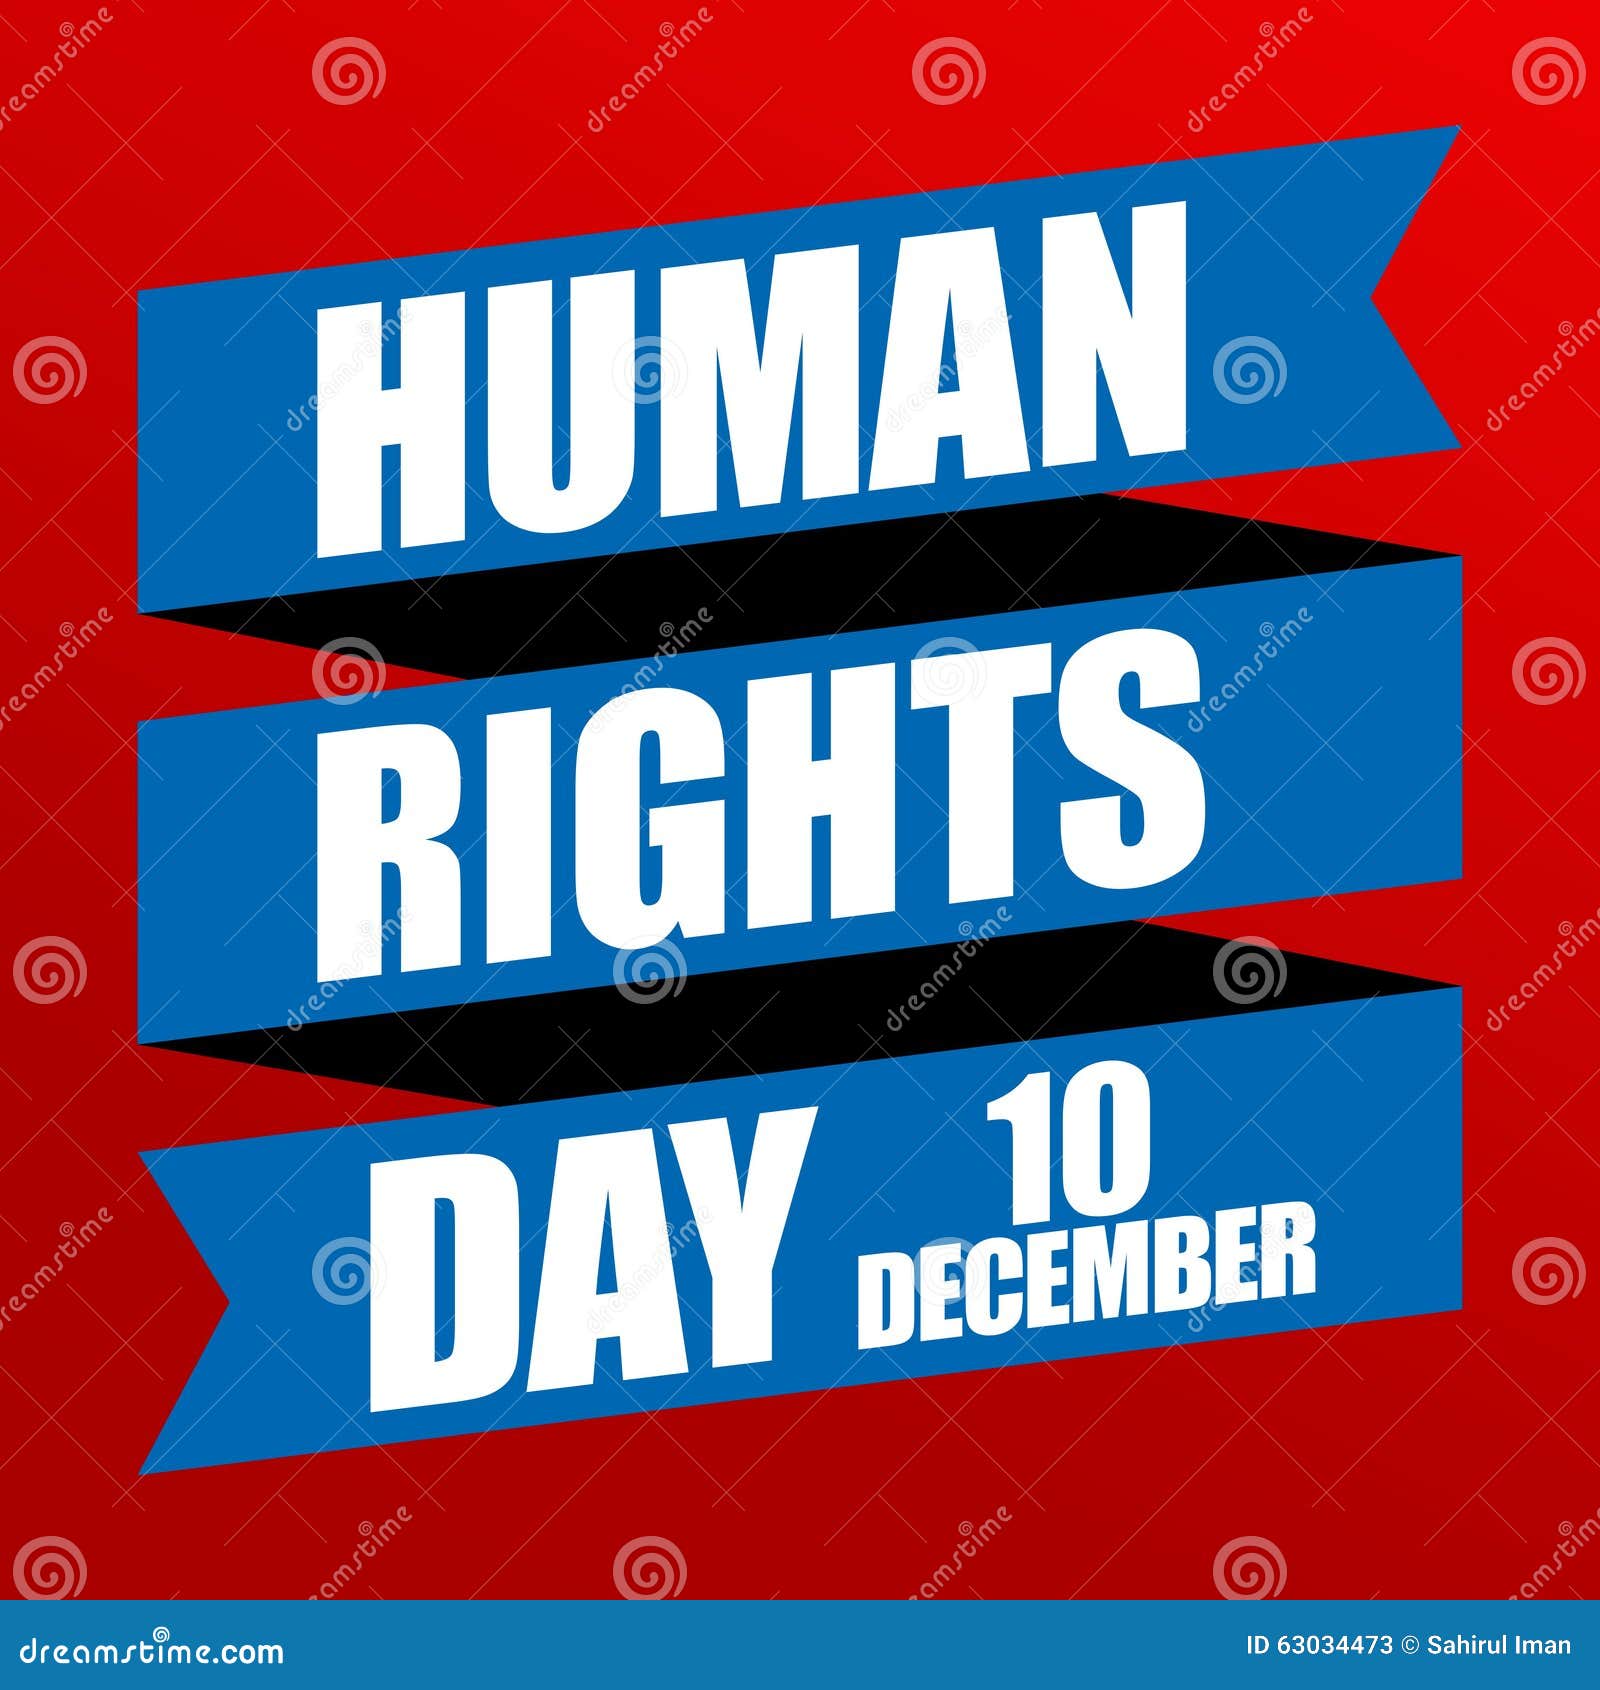 clip art for human rights - photo #18